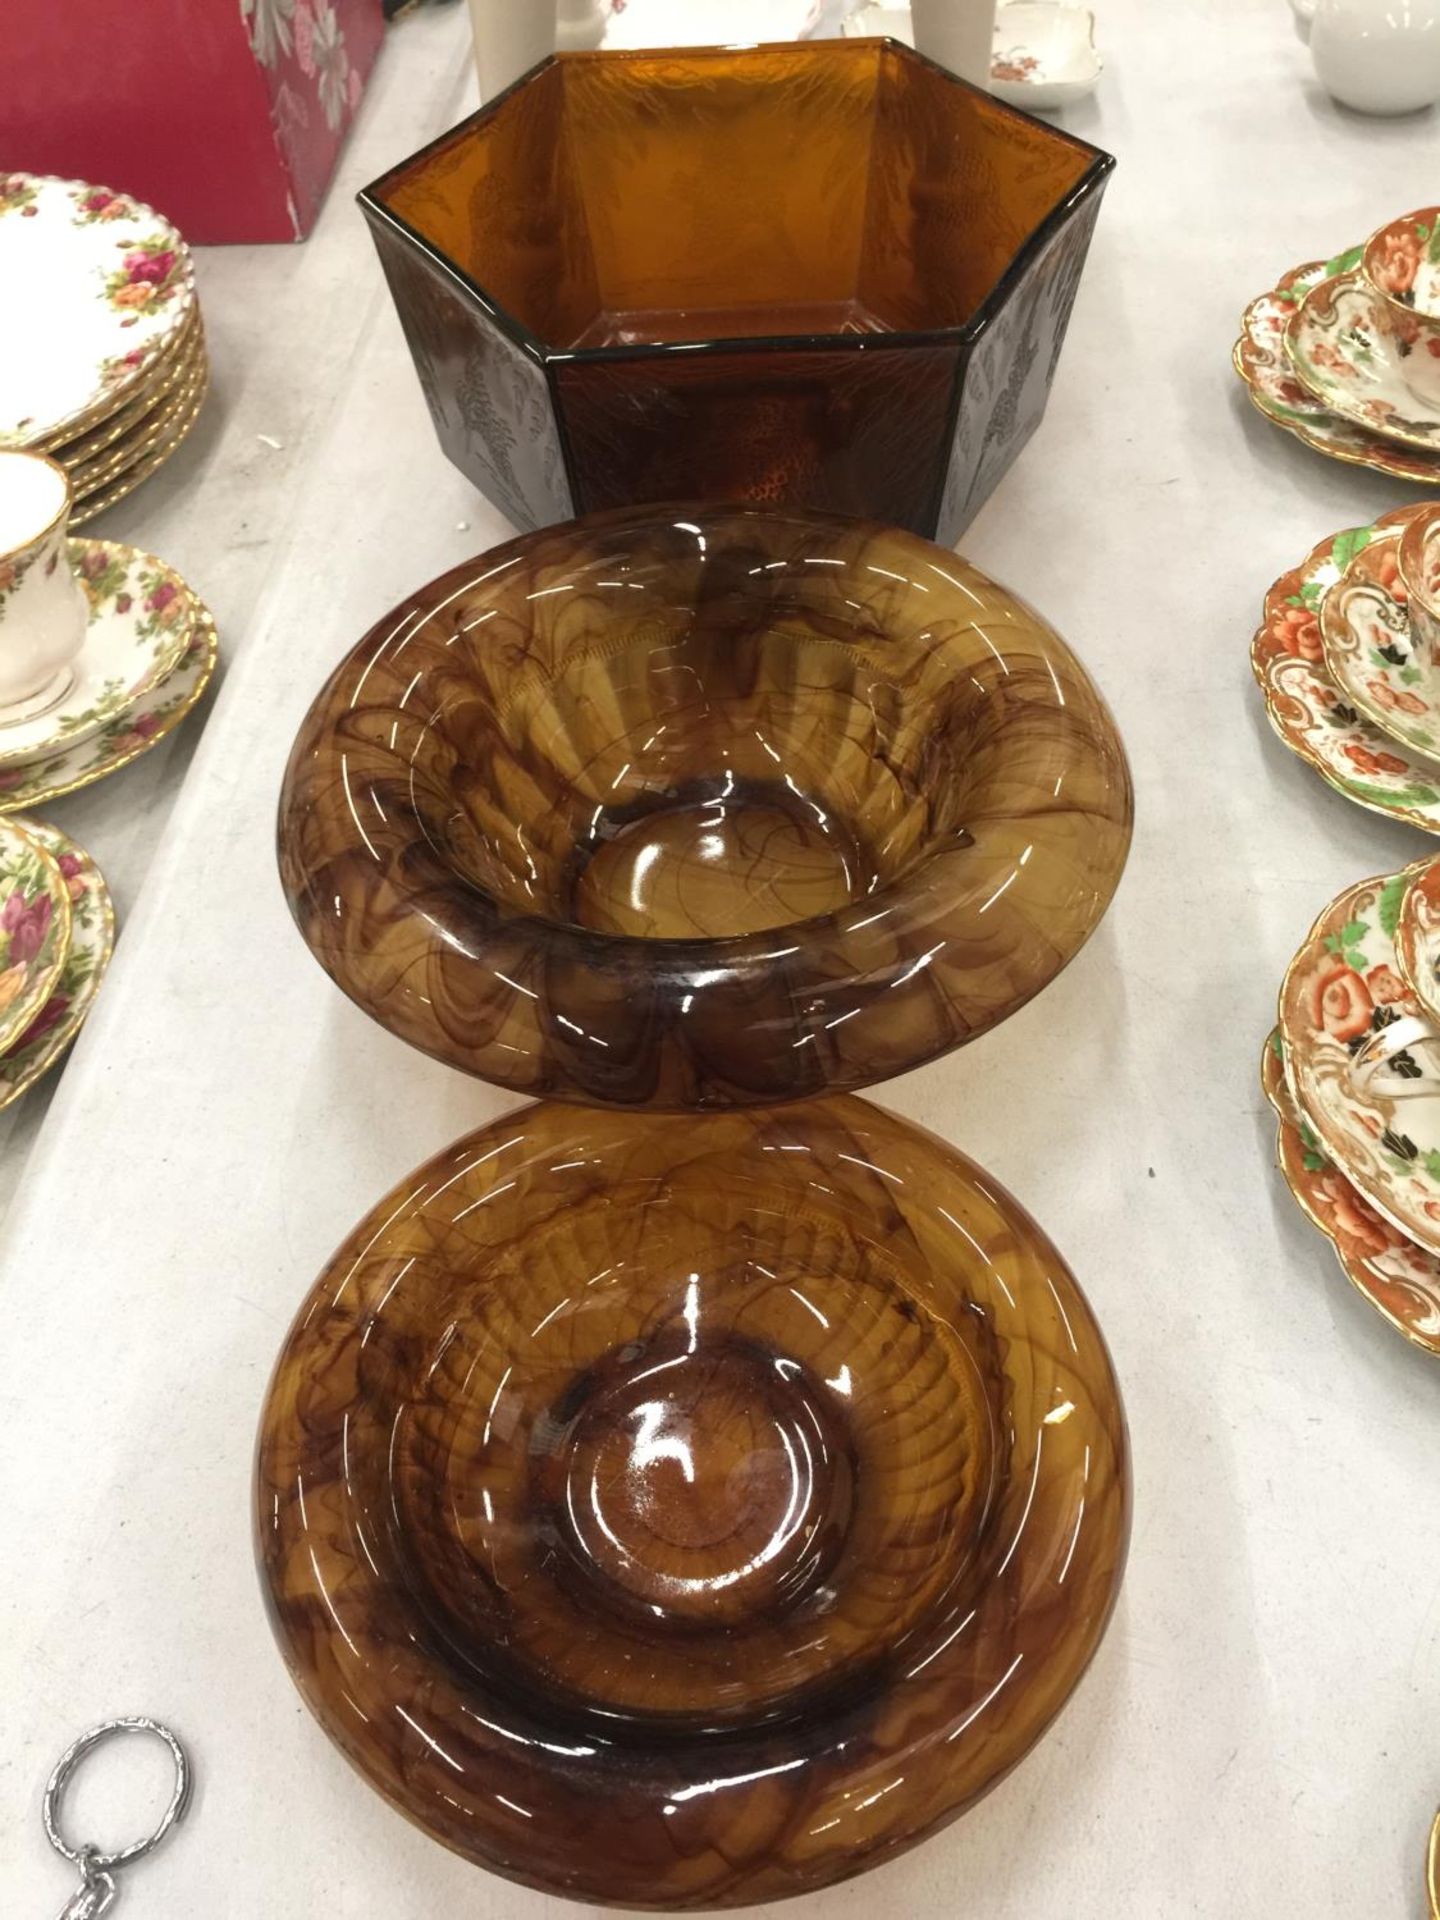 THREE AMBER CLOUD GLASSWARE BOWLS TO INCLUDE ONE WITH EMBOSSED KINGFISHERS